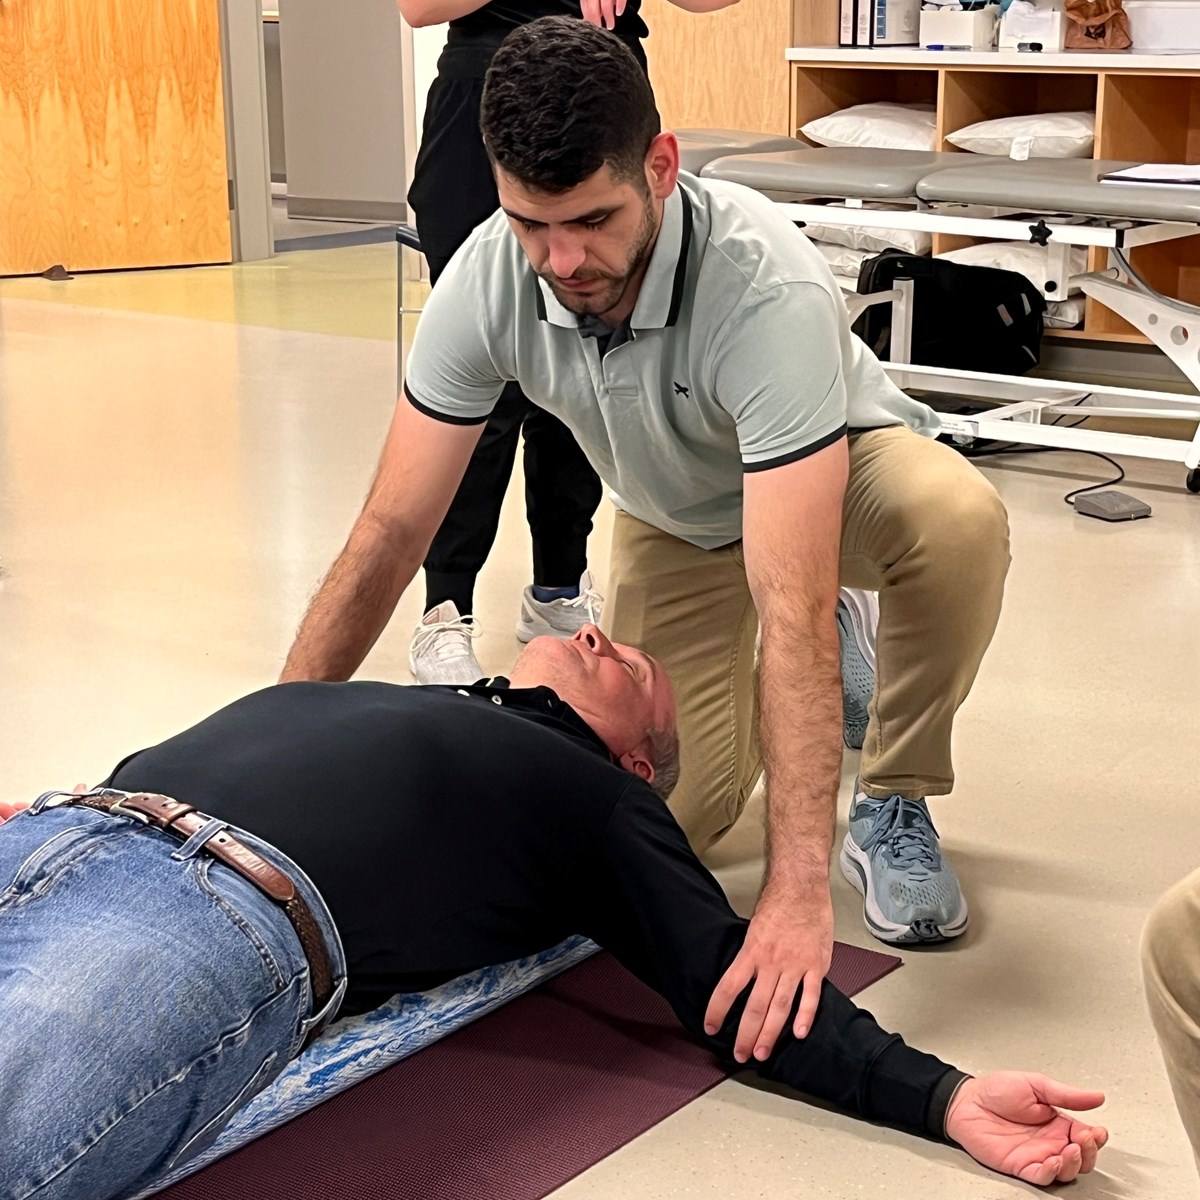 A student presses down on a patient's arms in a UMass Lowell physical therapy clinic.